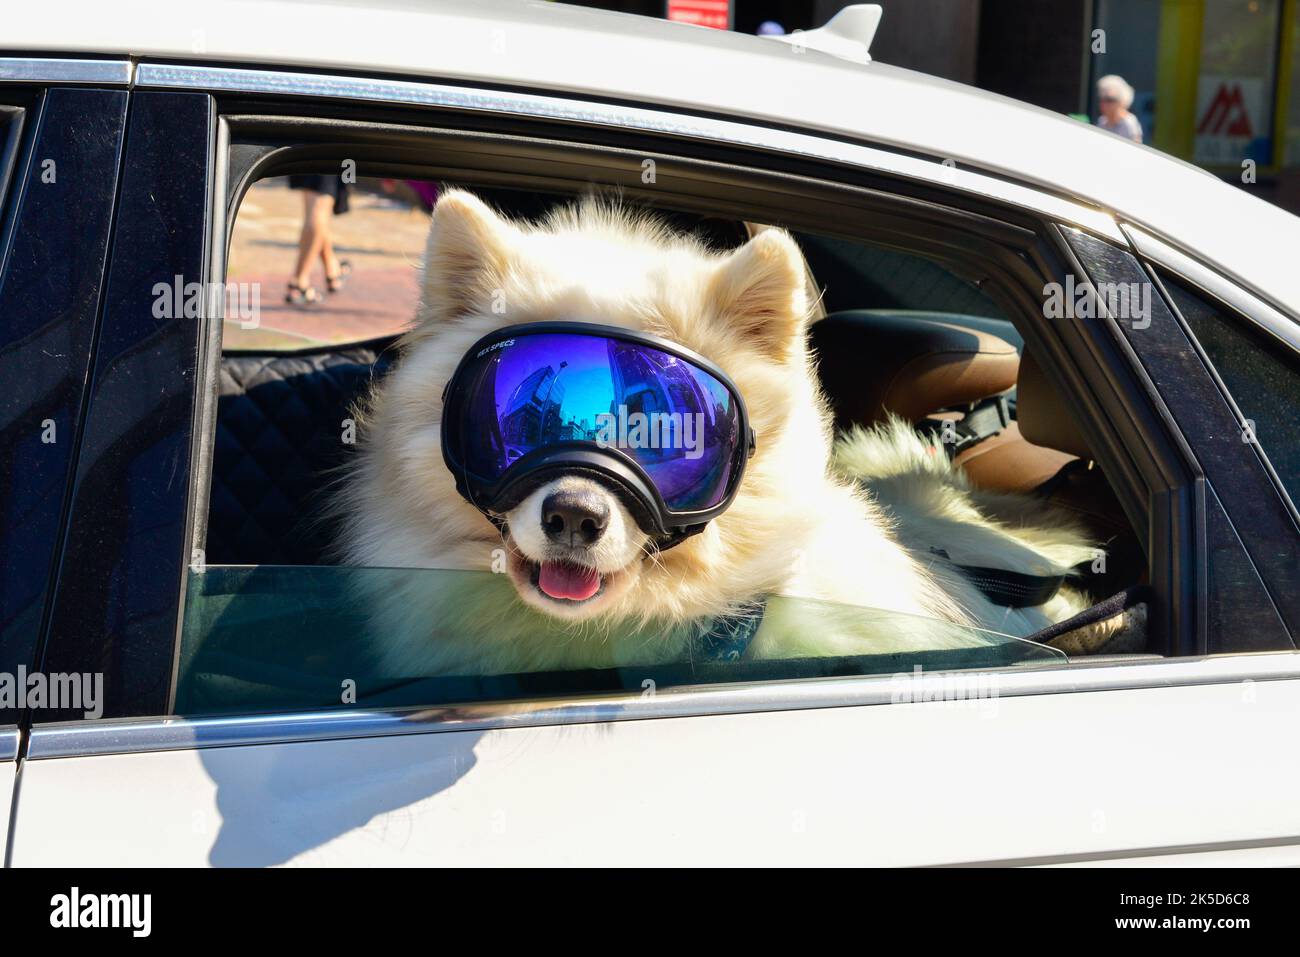 A large white Samoyed dog or Siberia husky wearing large blue reflective ski goggles or mask. The dog is hanging out the back of a white car window. Stock Photo